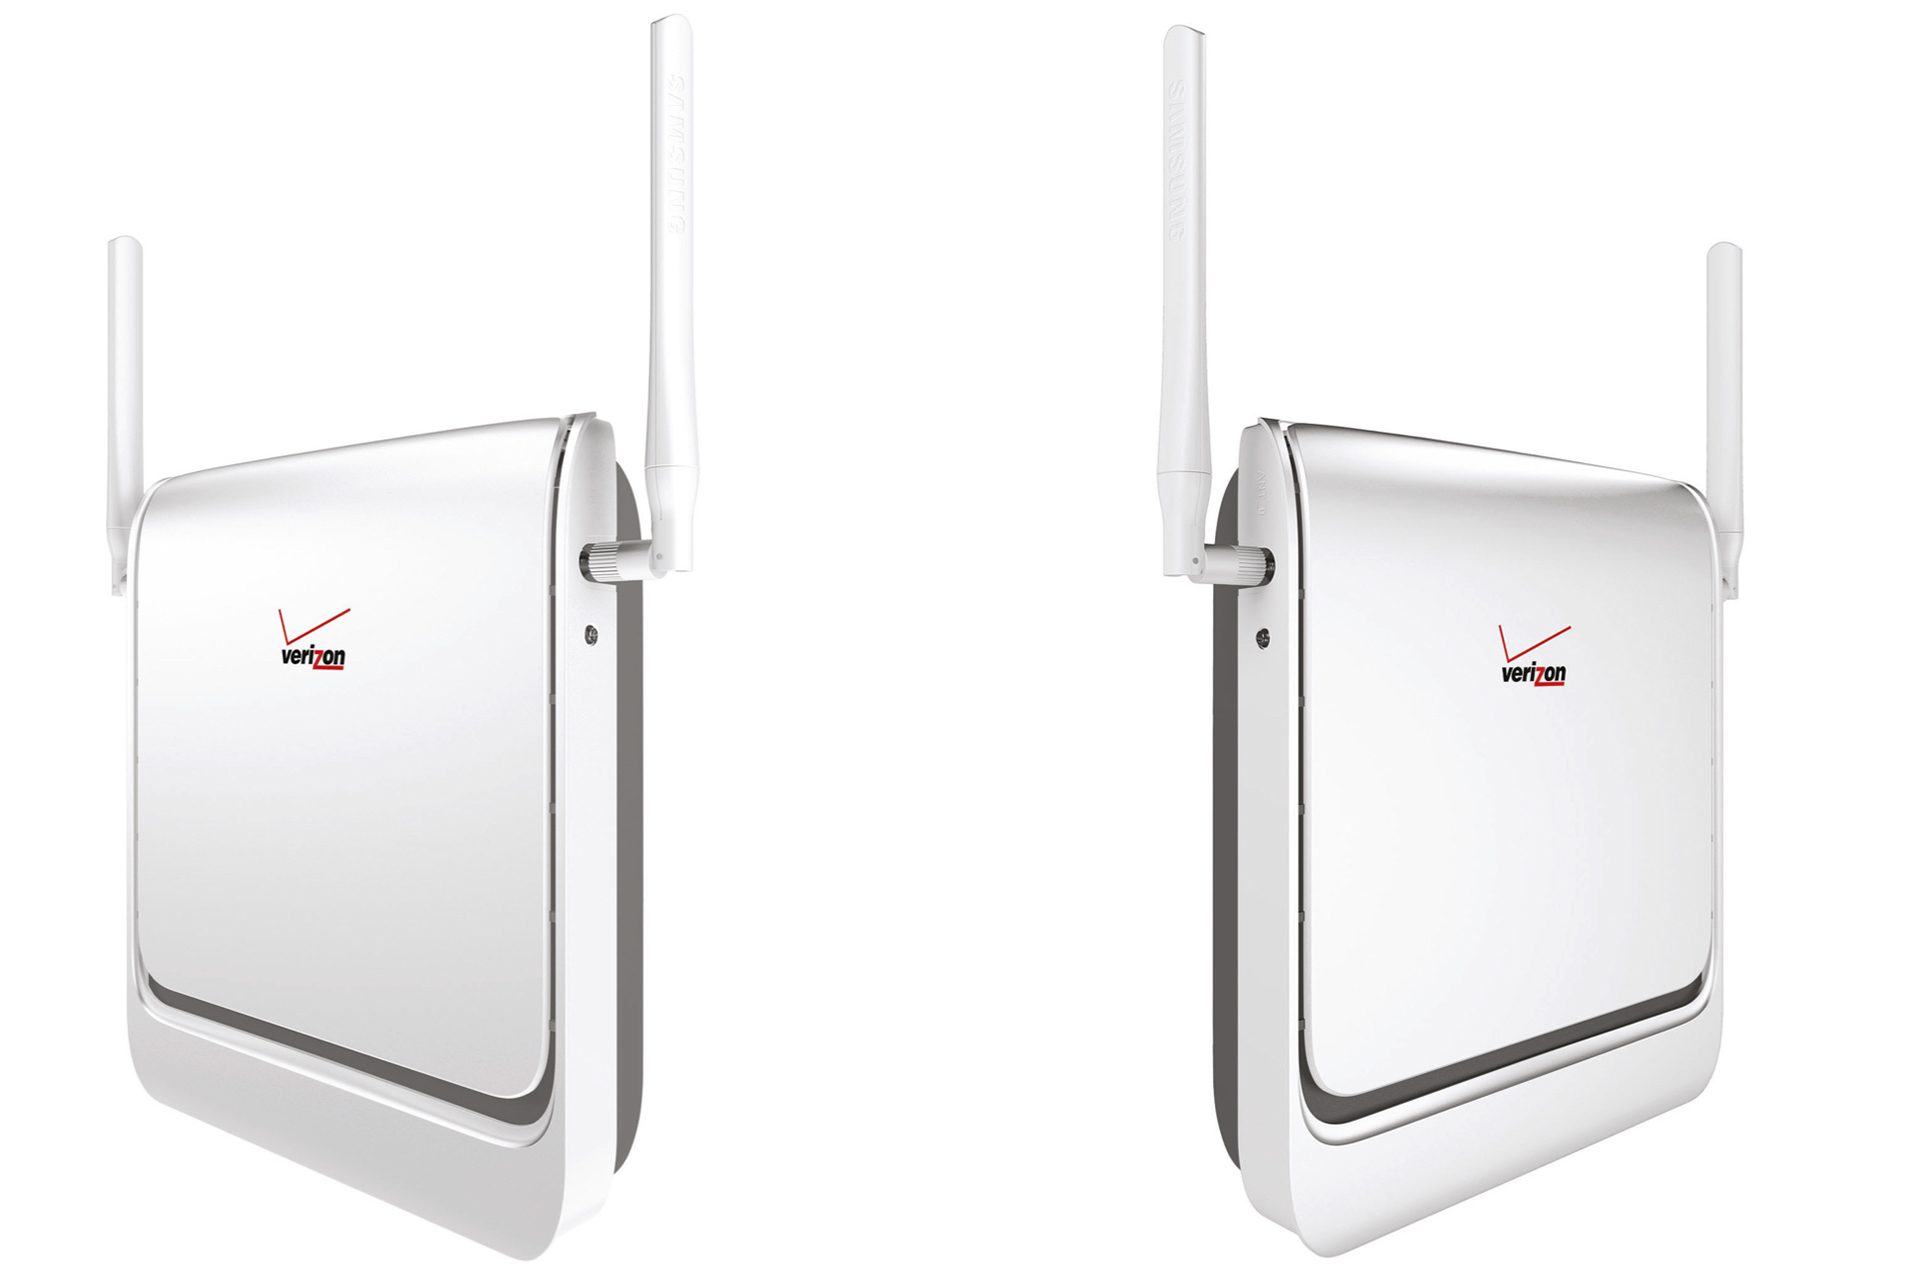 An AT&T Small Cell station connected to your router and placed strategically in the residence will behave much like an Internet Access Point and provide coverage throughout the residence.